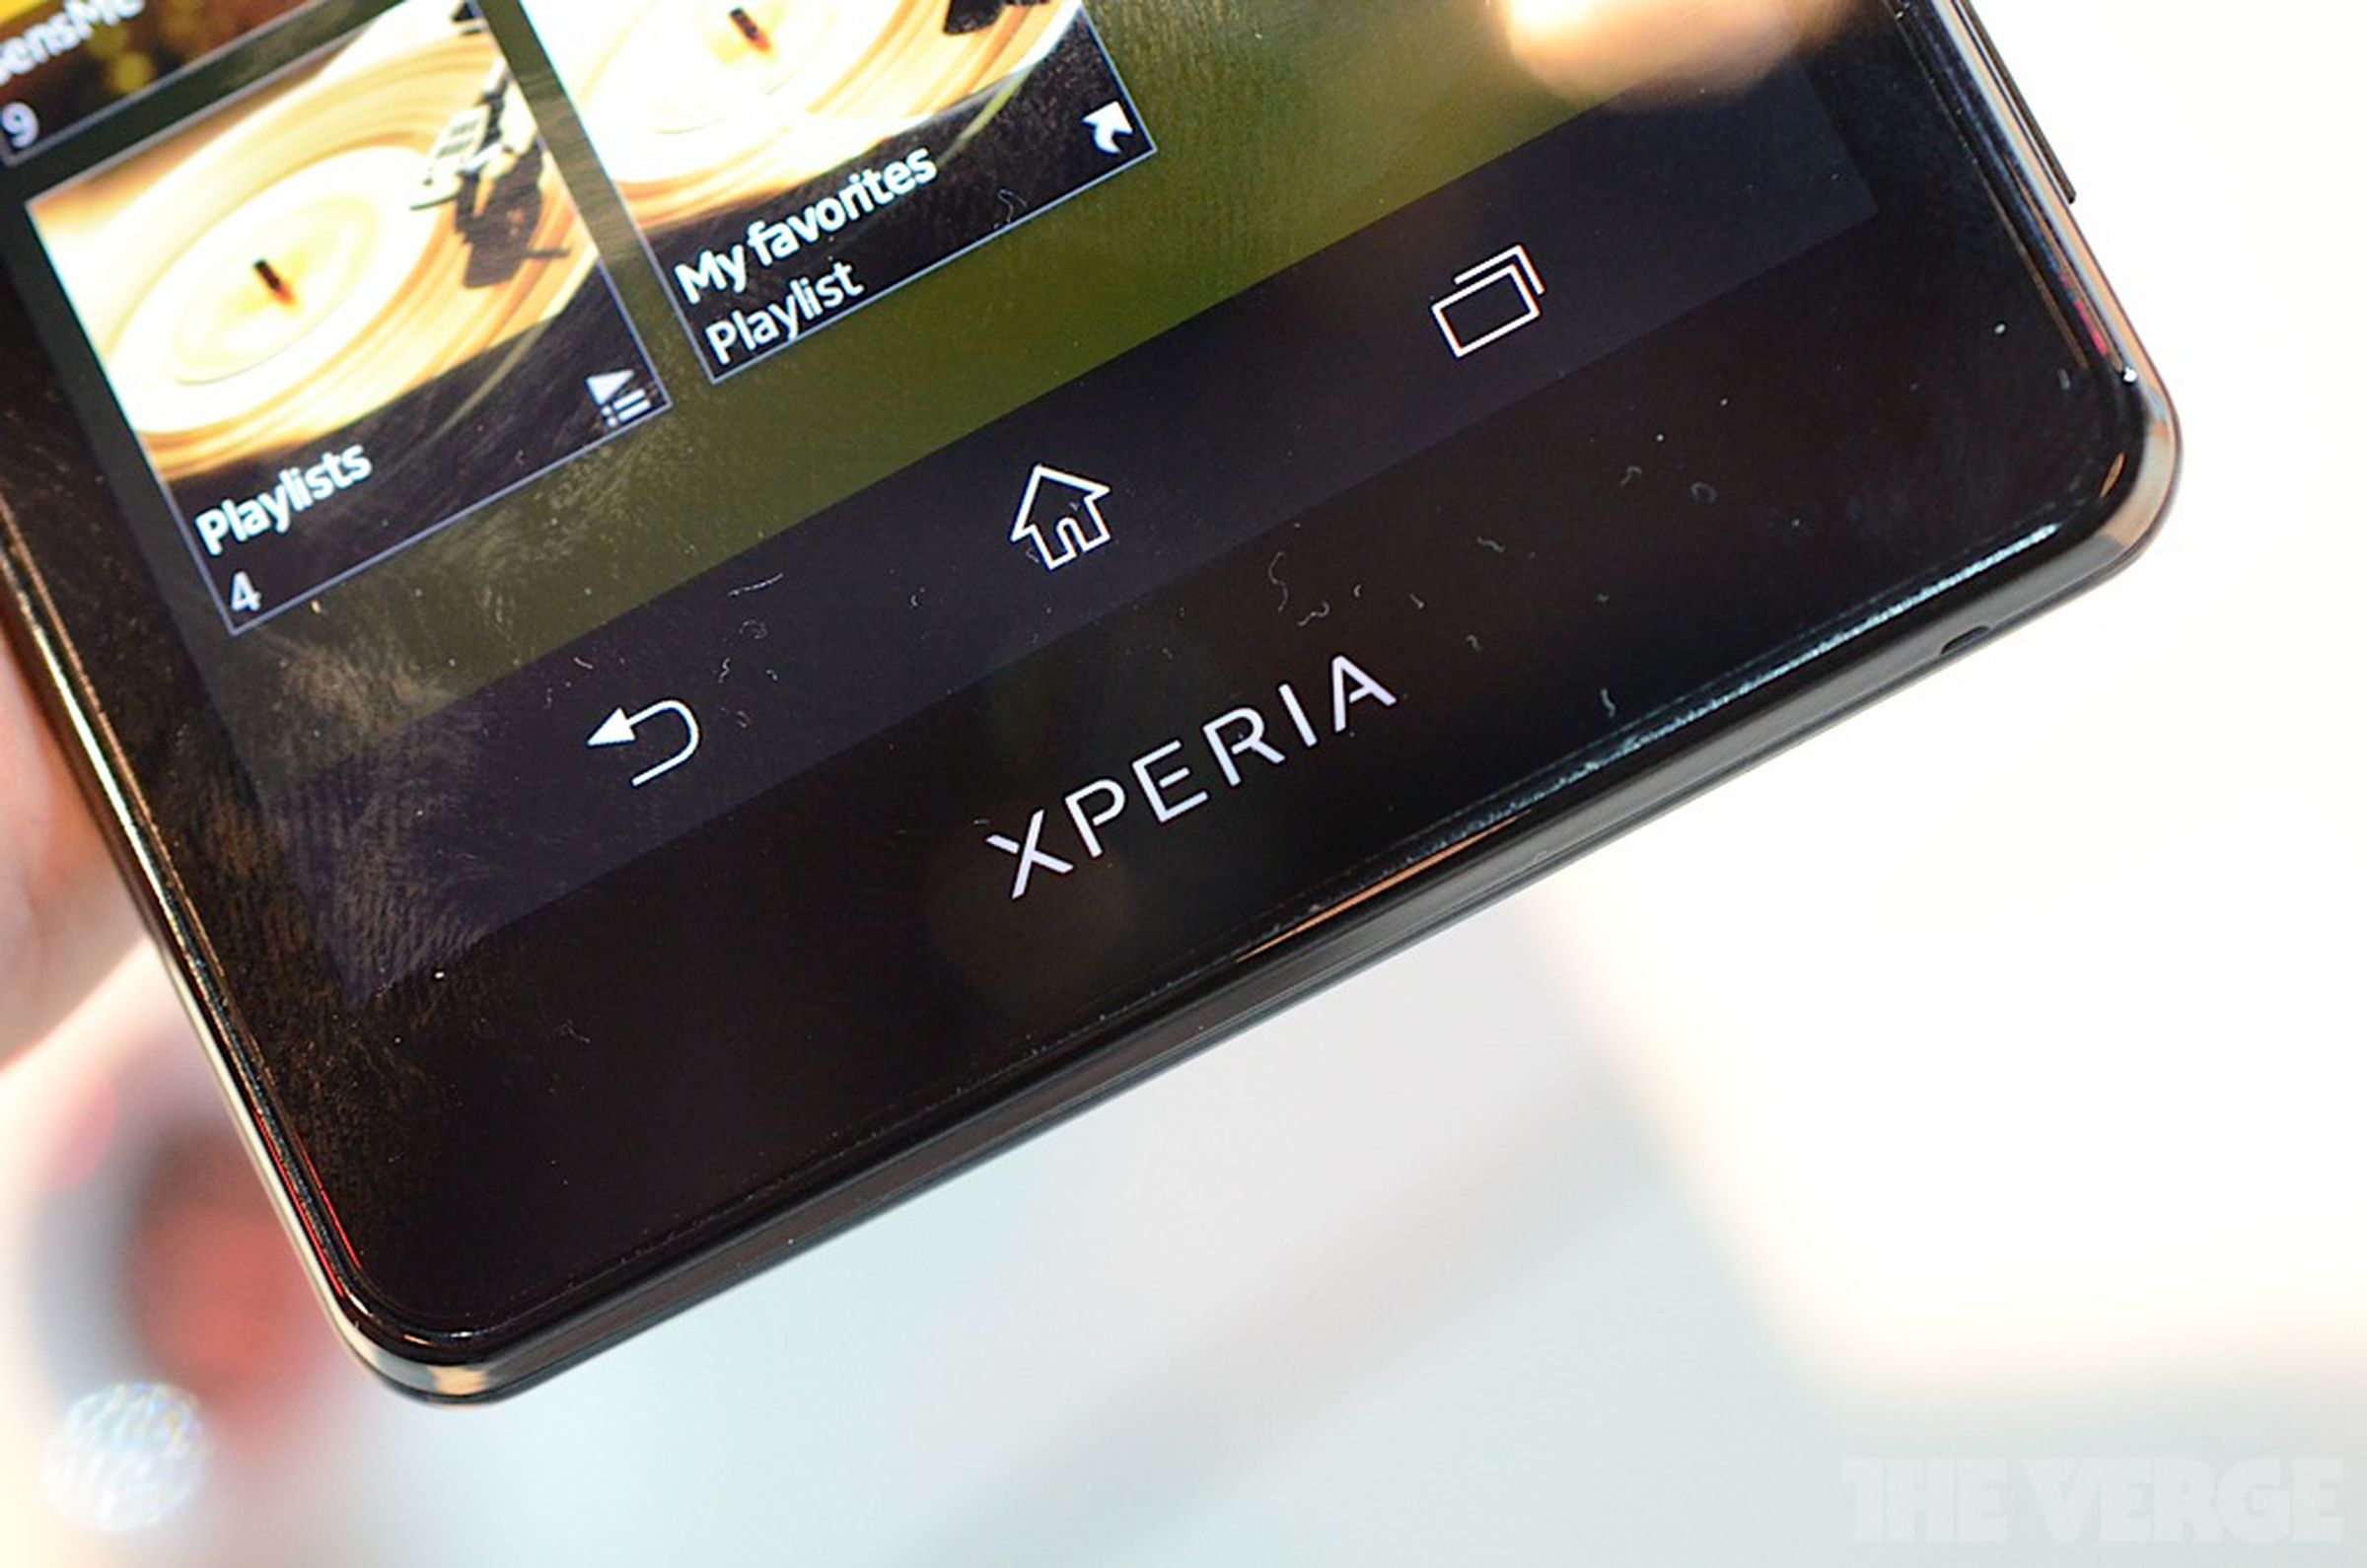 Sony Xperia T / TX hands-on pictures